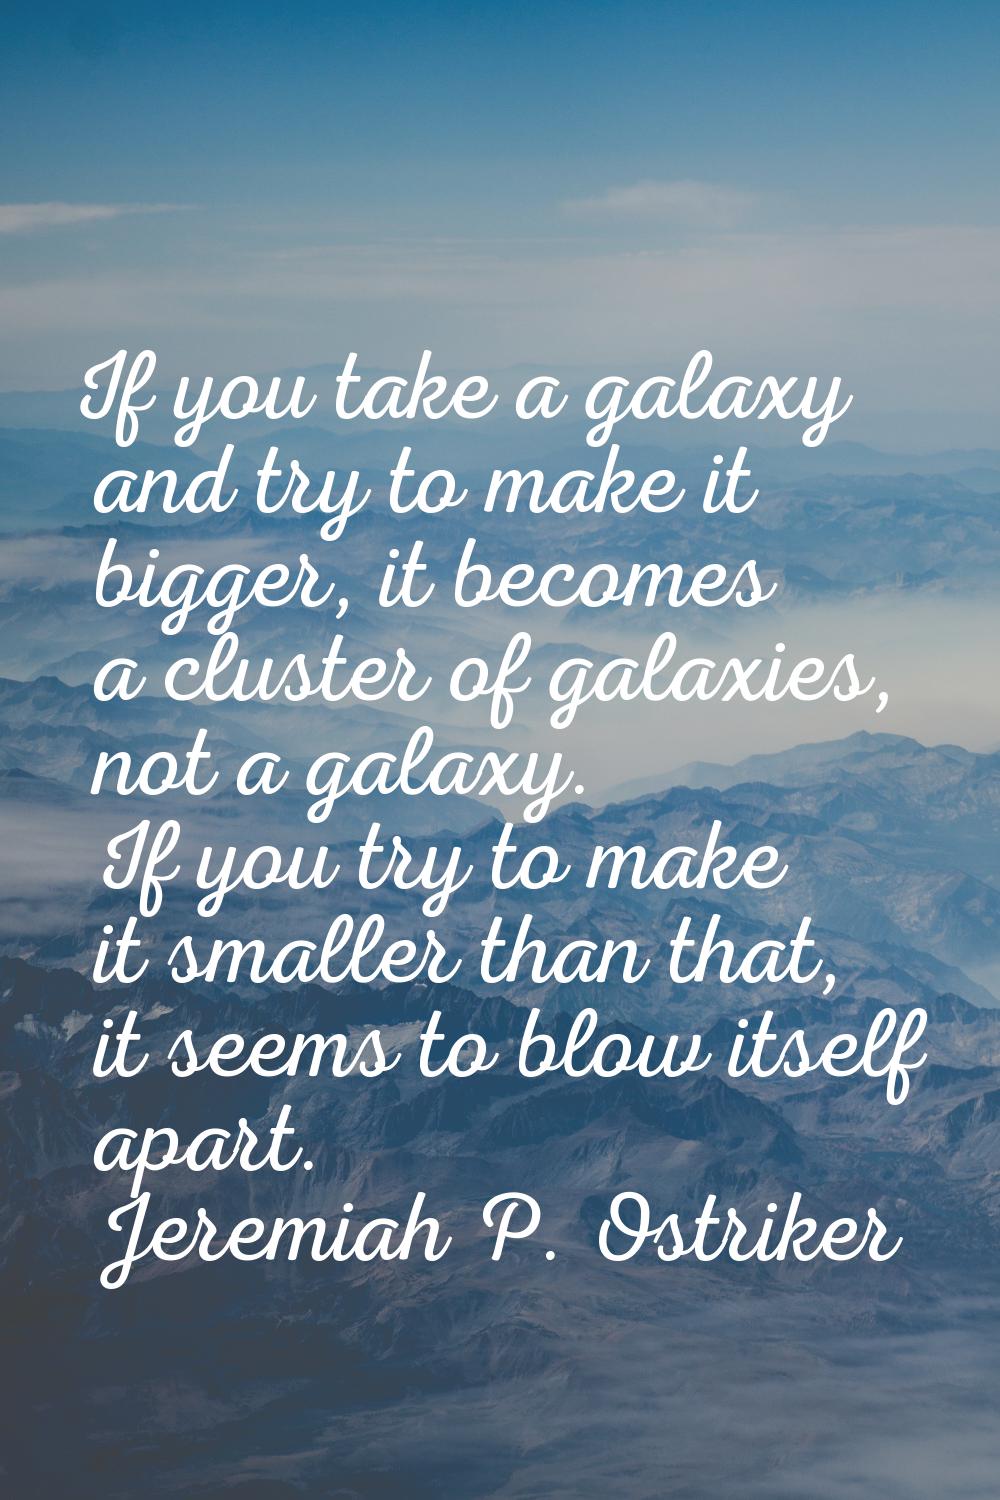 If you take a galaxy and try to make it bigger, it becomes a cluster of galaxies, not a galaxy. If 